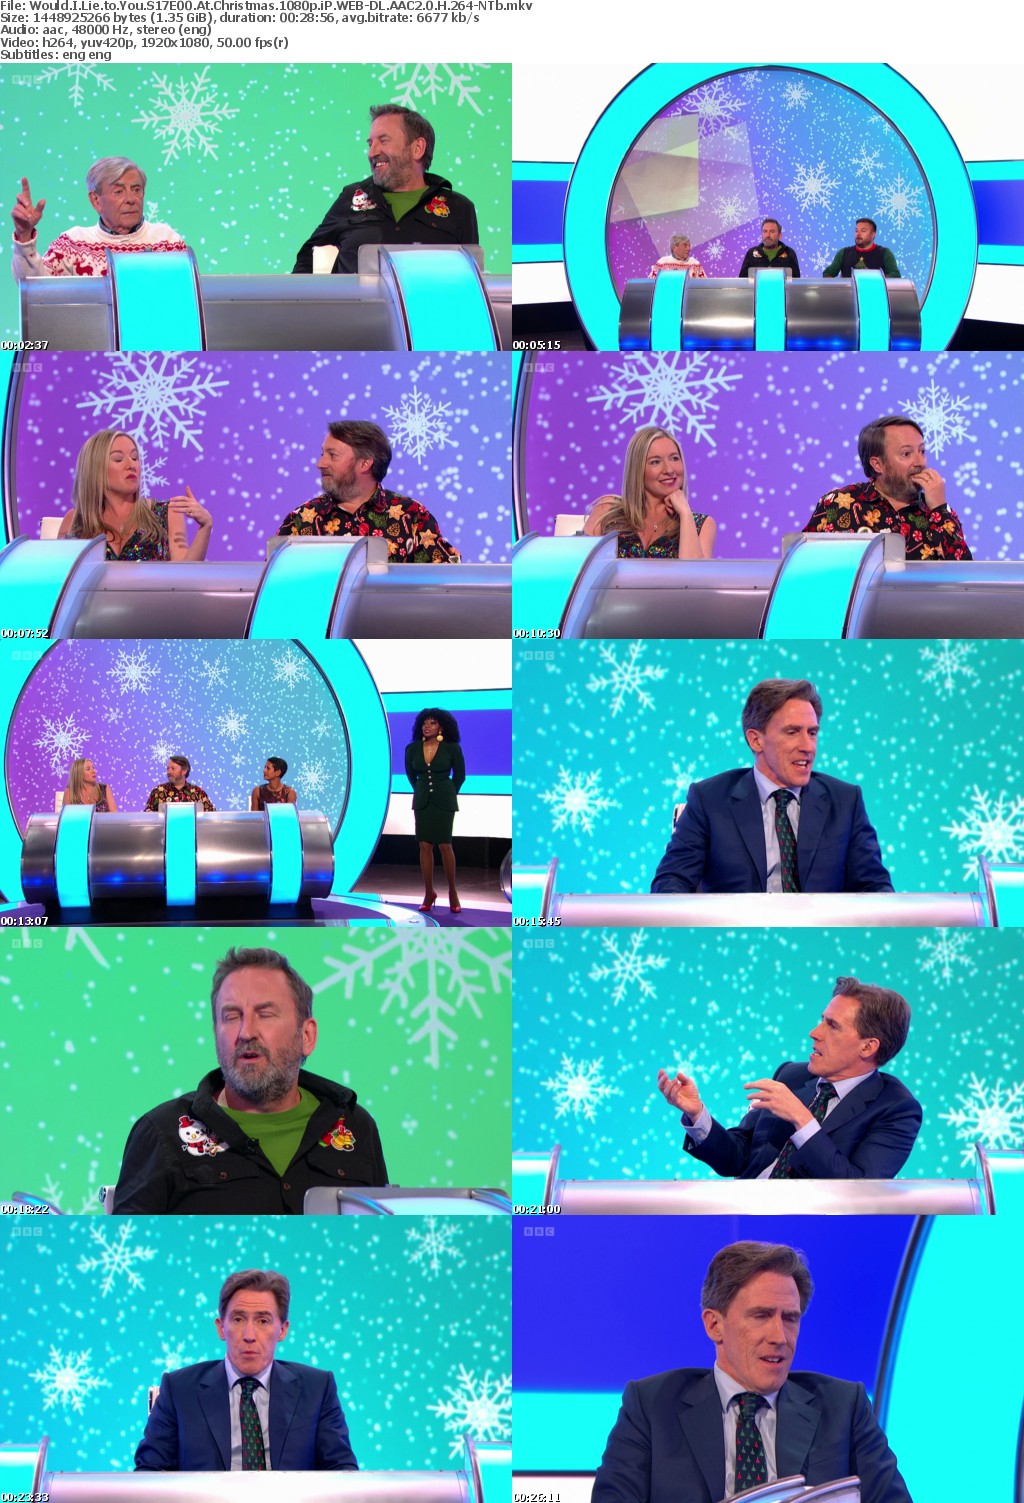 Would I Lie to You S17E00 At Christmas 1080p iP WEB-DL AAC2 0 H 264-NTb